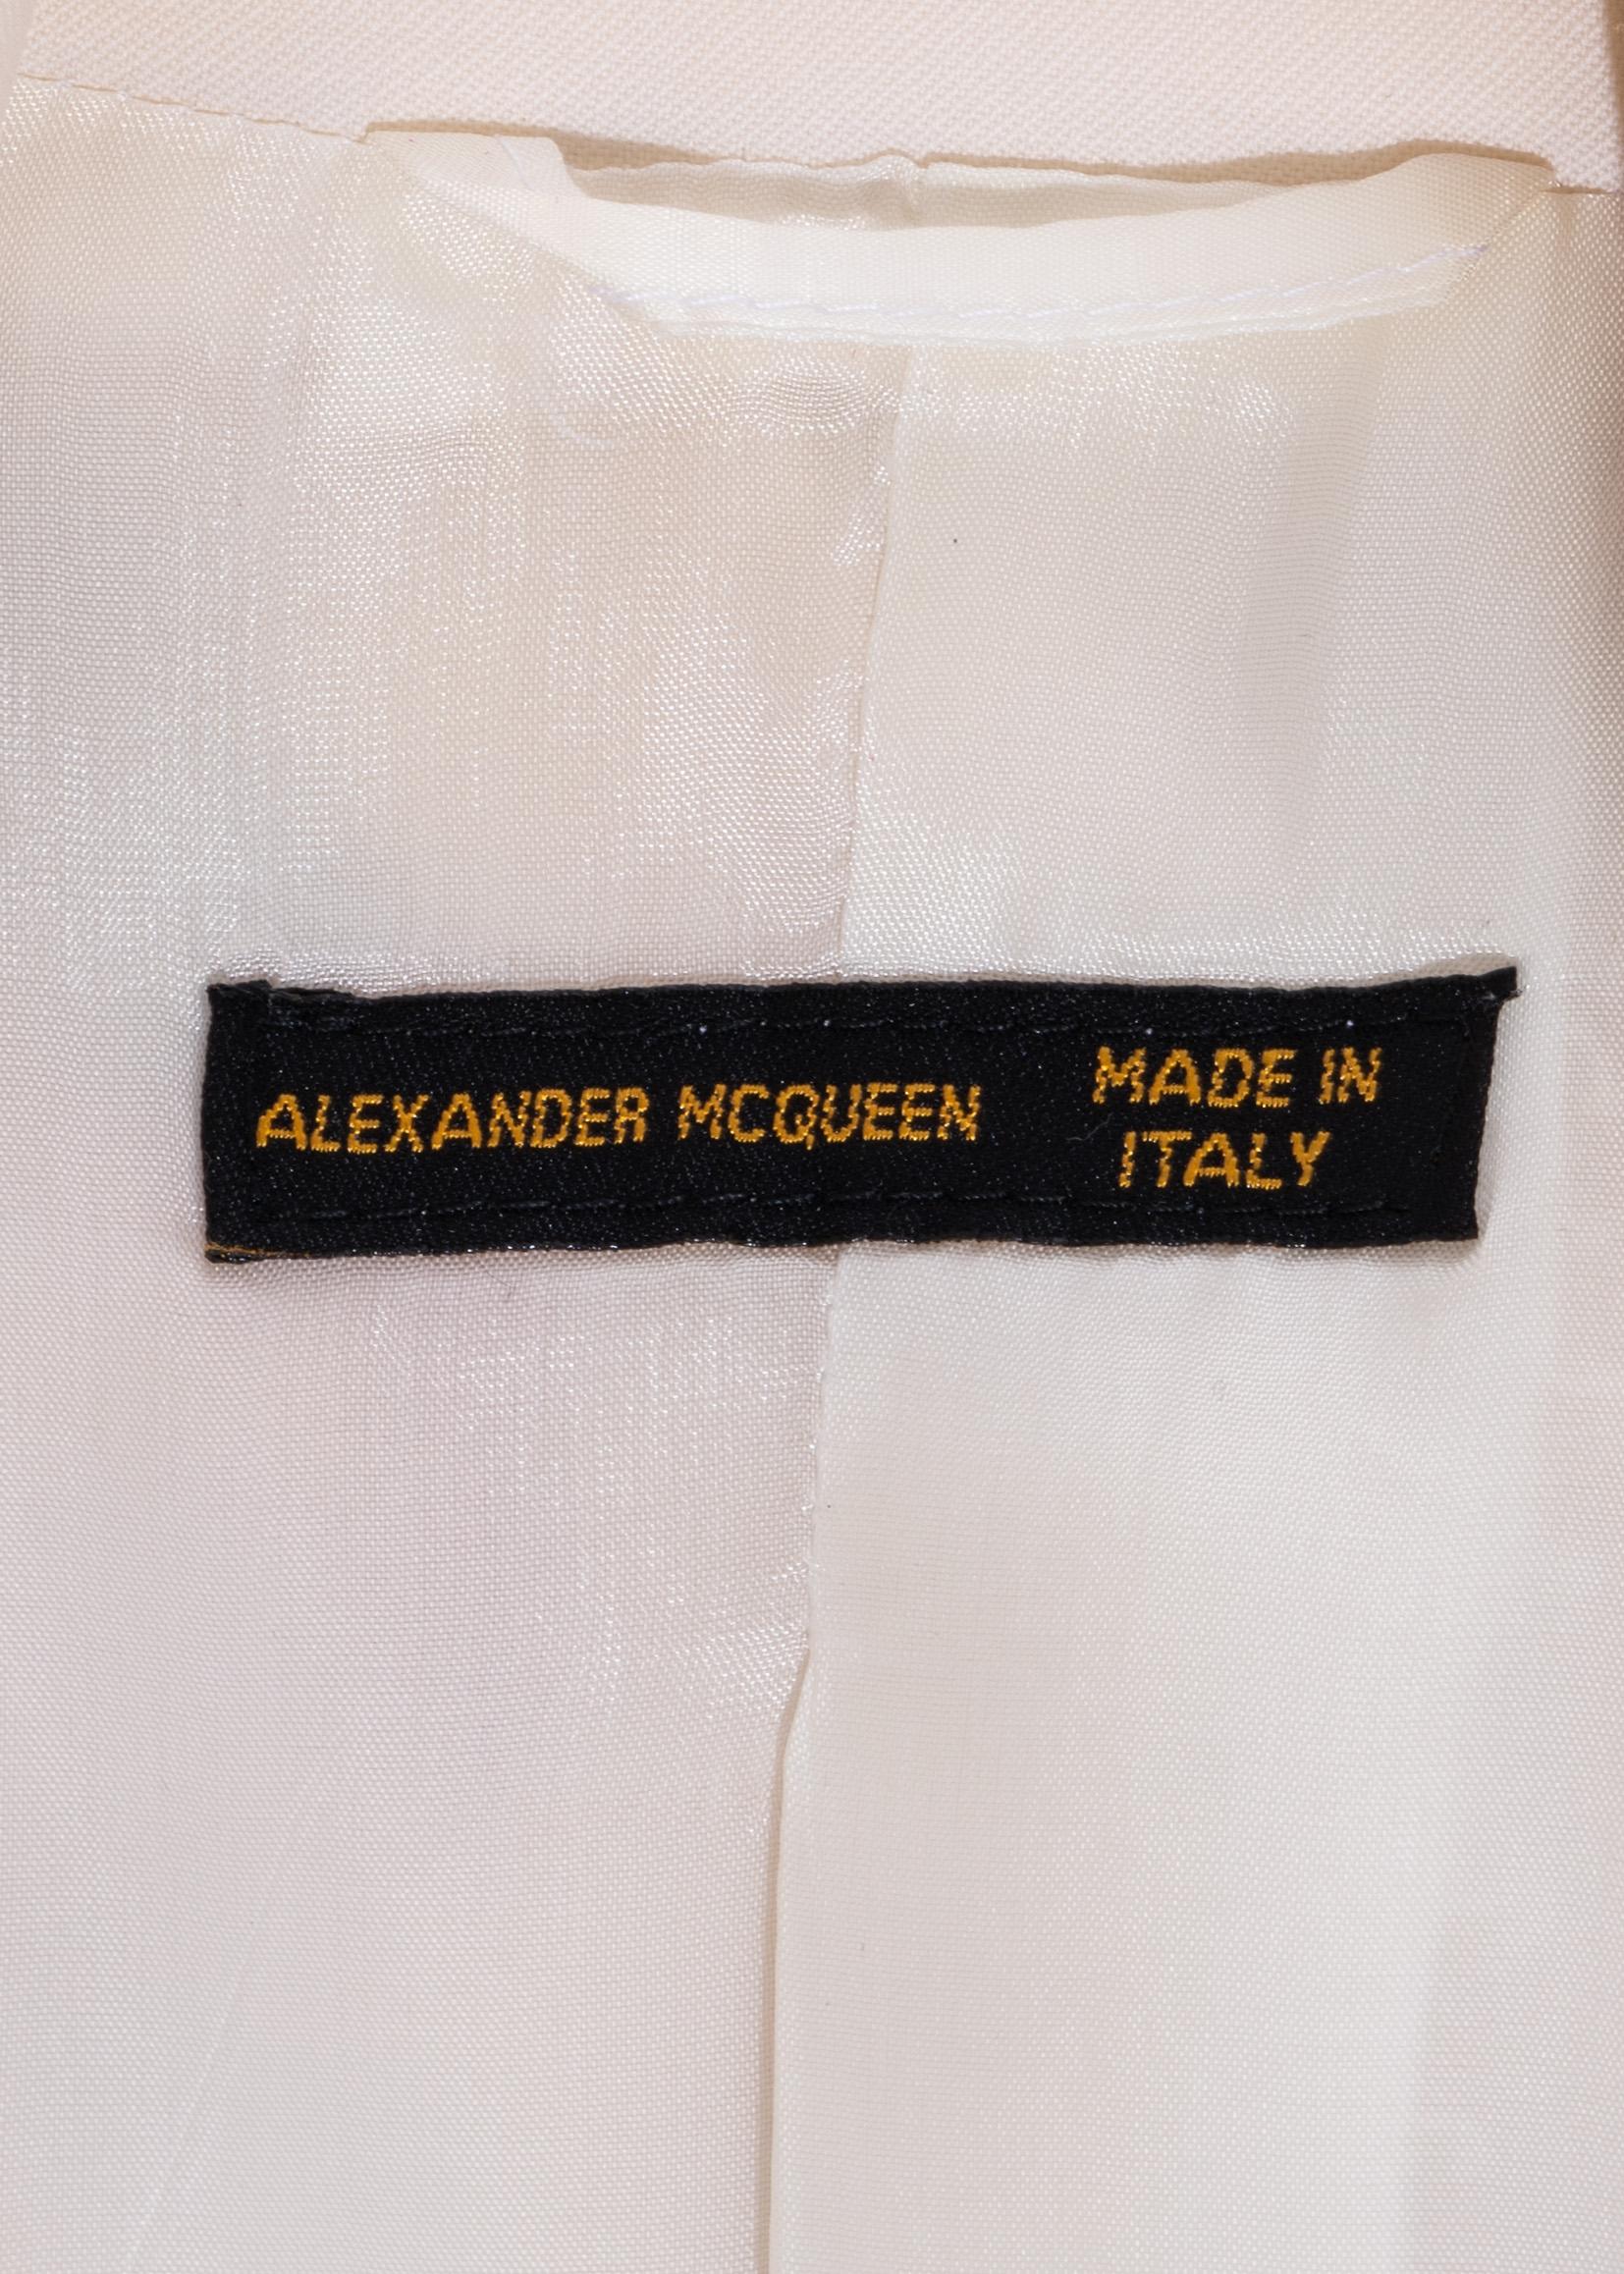 Alexander McQueen ivory wool embroidered skirt suit, c. 1997-1999 For Sale 1